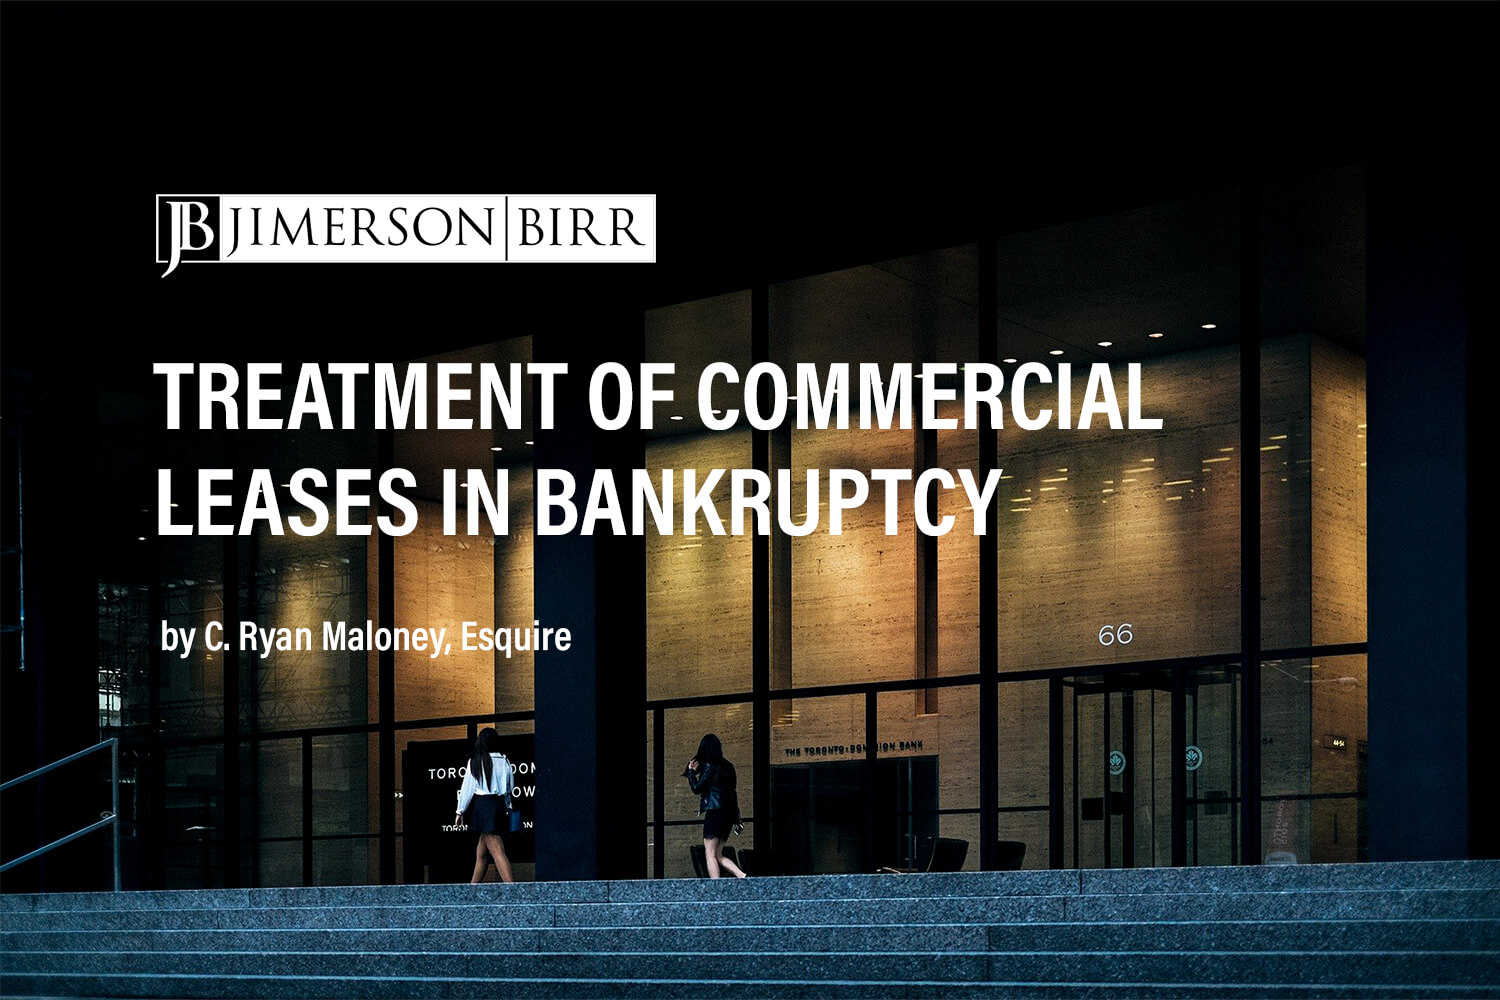 Treatment of Commercial Leases in Bankruptcy